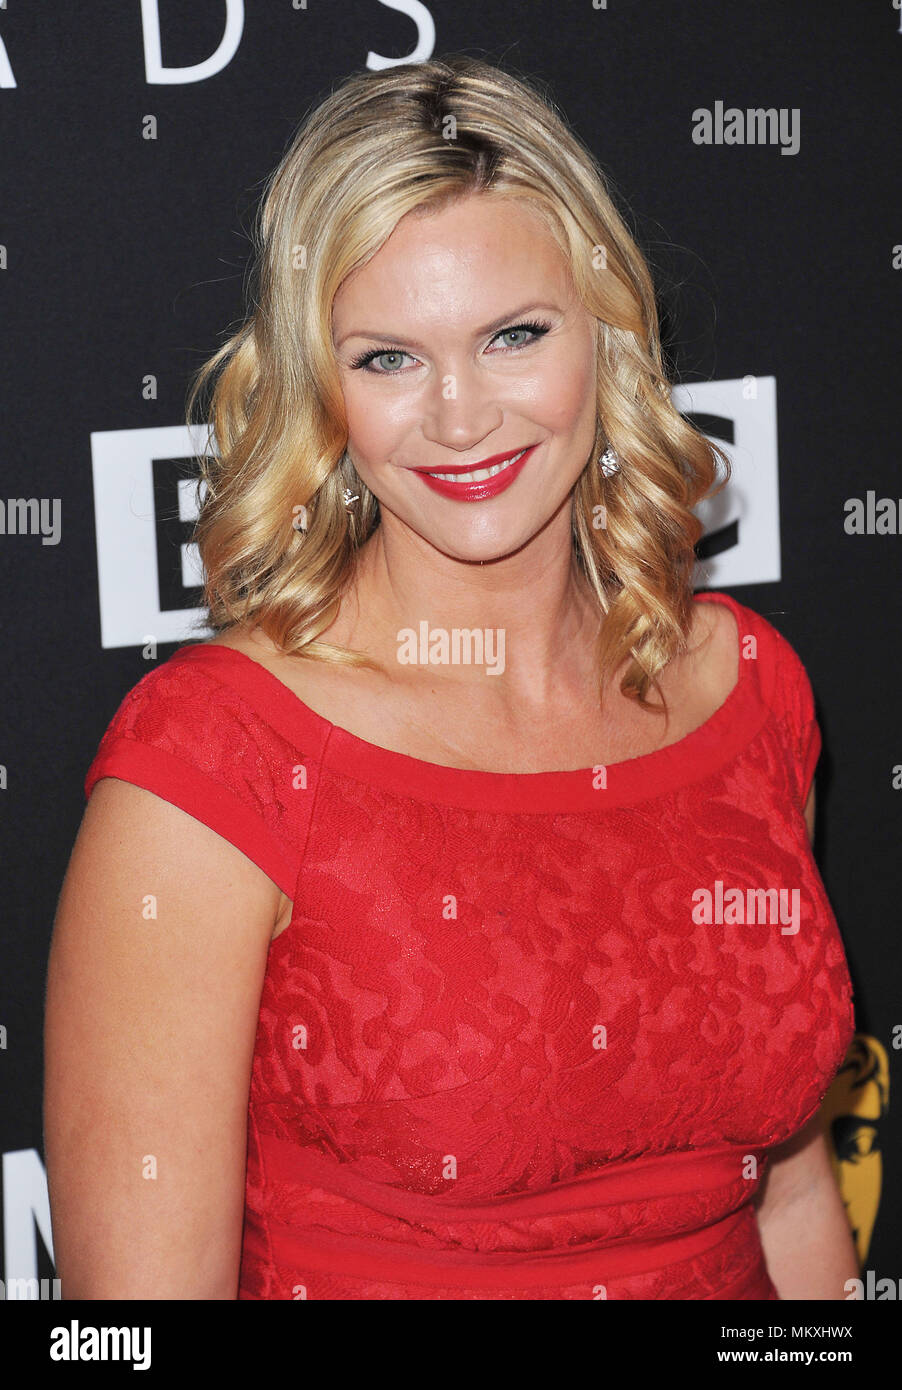 Natasha Henstridge  at the 2012 Britannia Awards At The Beverly Hillon Hotel In Los Angeles.Natasha Henstridge  89 Red Carpet Event, Vertical, USA, Film Industry, Celebrities,  Photography, Bestof, Arts Culture and Entertainment, Topix Celebrities fashion /  Vertical, Best of, Event in Hollywood Life - California,  Red Carpet and backstage, USA, Film Industry, Celebrities,  movie celebrities, TV celebrities, Music celebrities, Photography, Bestof, Arts Culture and Entertainment,  Topix, headshot, vertical, one person,, from the year , 2012, inquiry tsuni@Gamma-USA.com Stock Photo